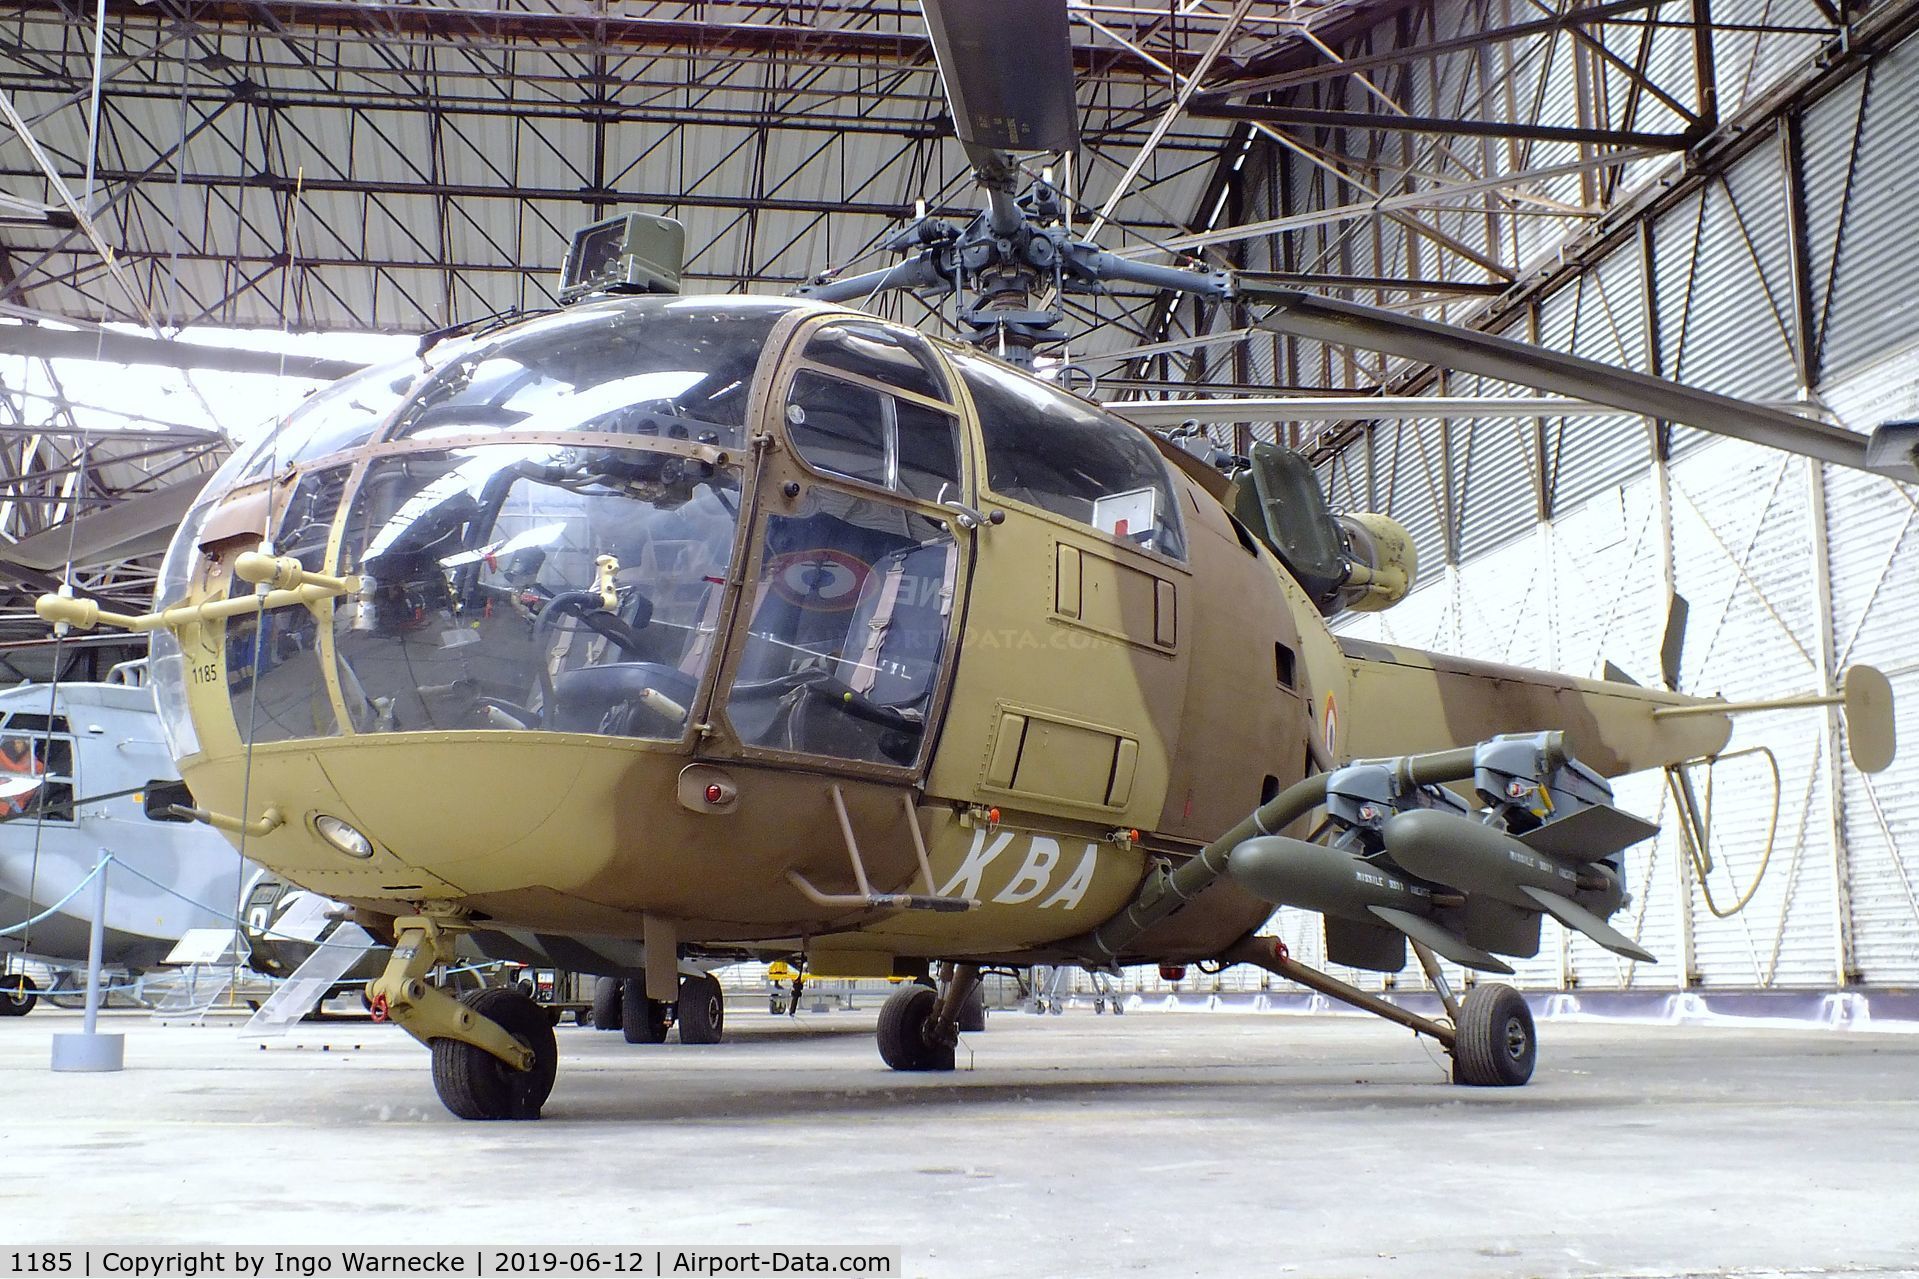 1185, Aérospatiale SA-316B Alouette III C/N 1185, Sud Aviation SA.316B Alouette III (anti-tank variant with SS.11/AS.11 missiles) at the Musee de l'ALAT et de l'Helicoptere, Dax